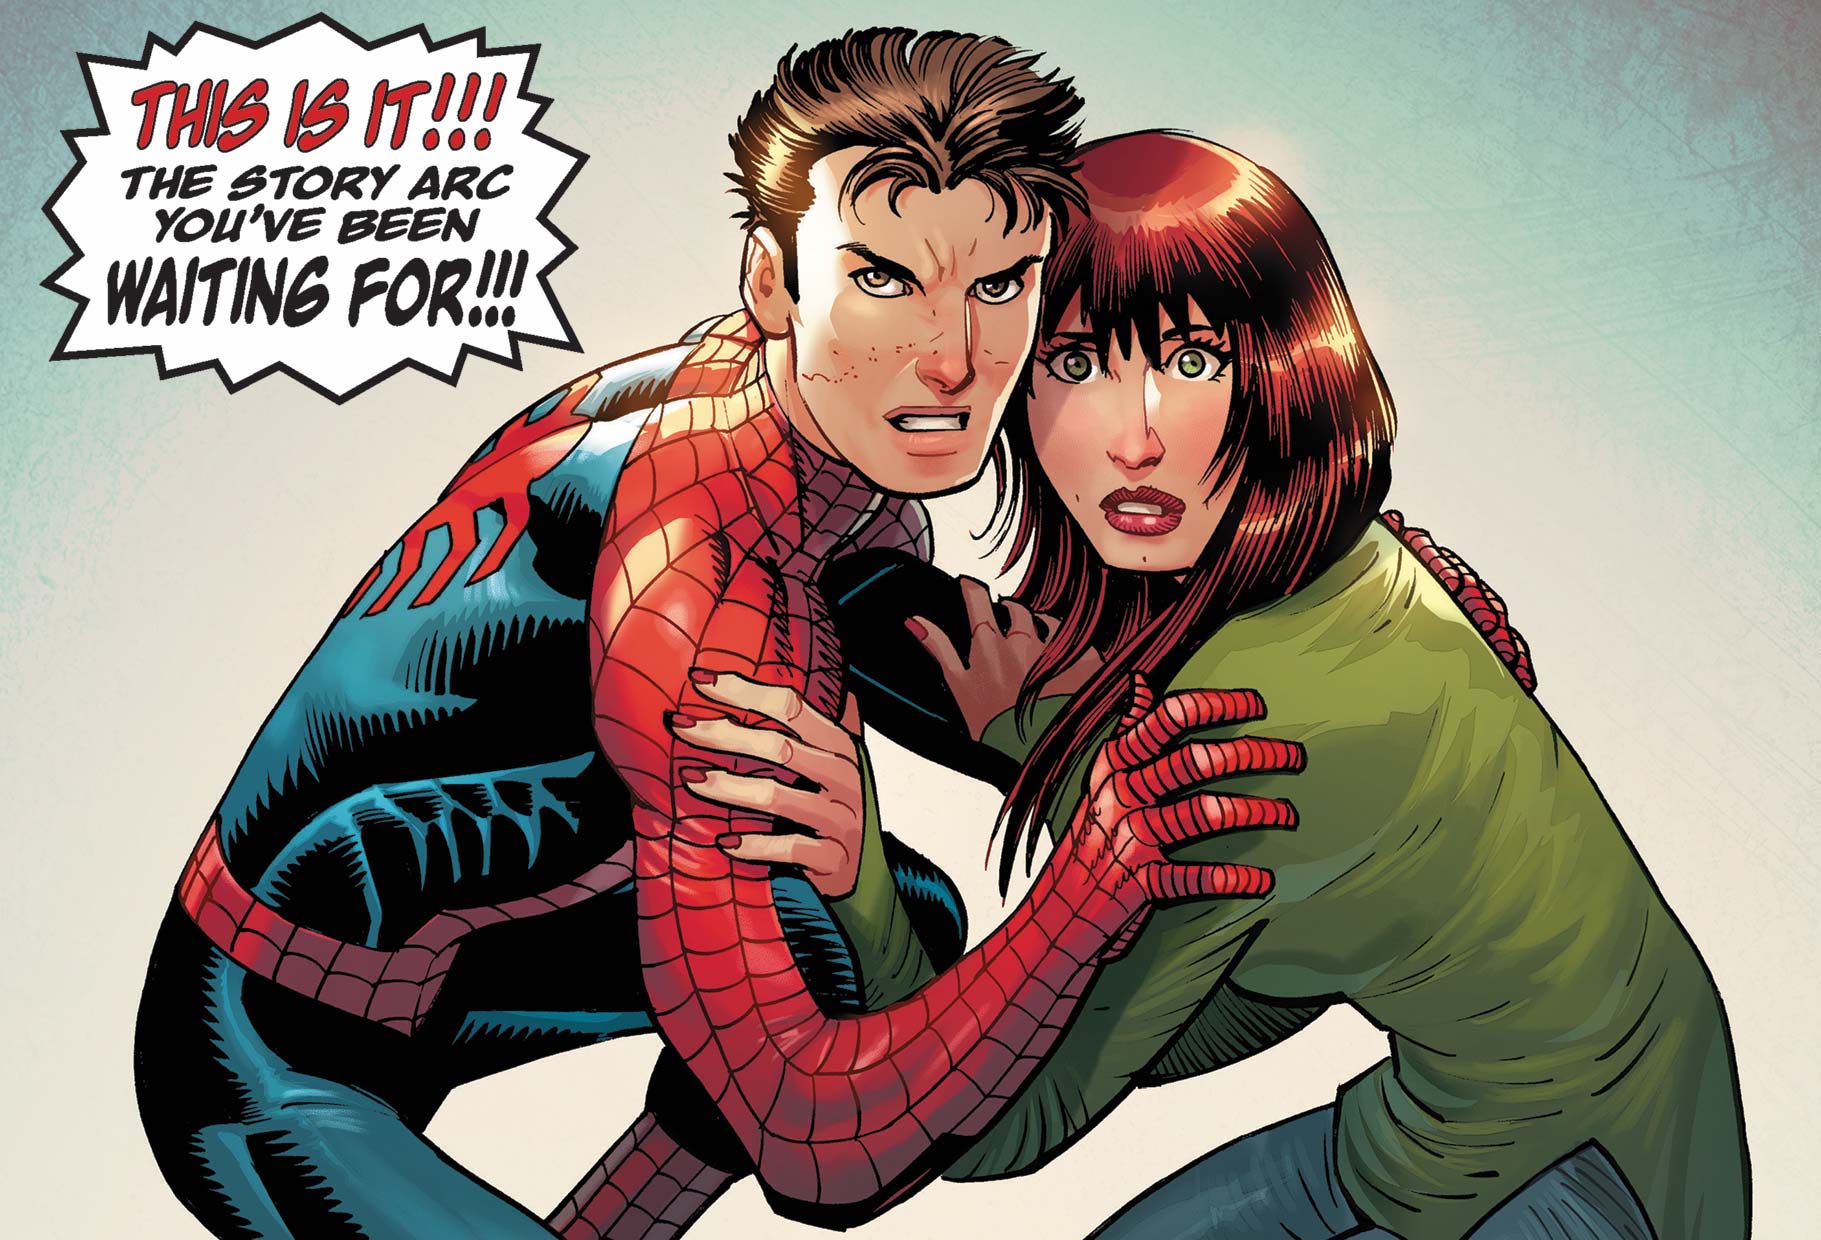 'Amazing Spider-Man' #21 promises more than it can deliver